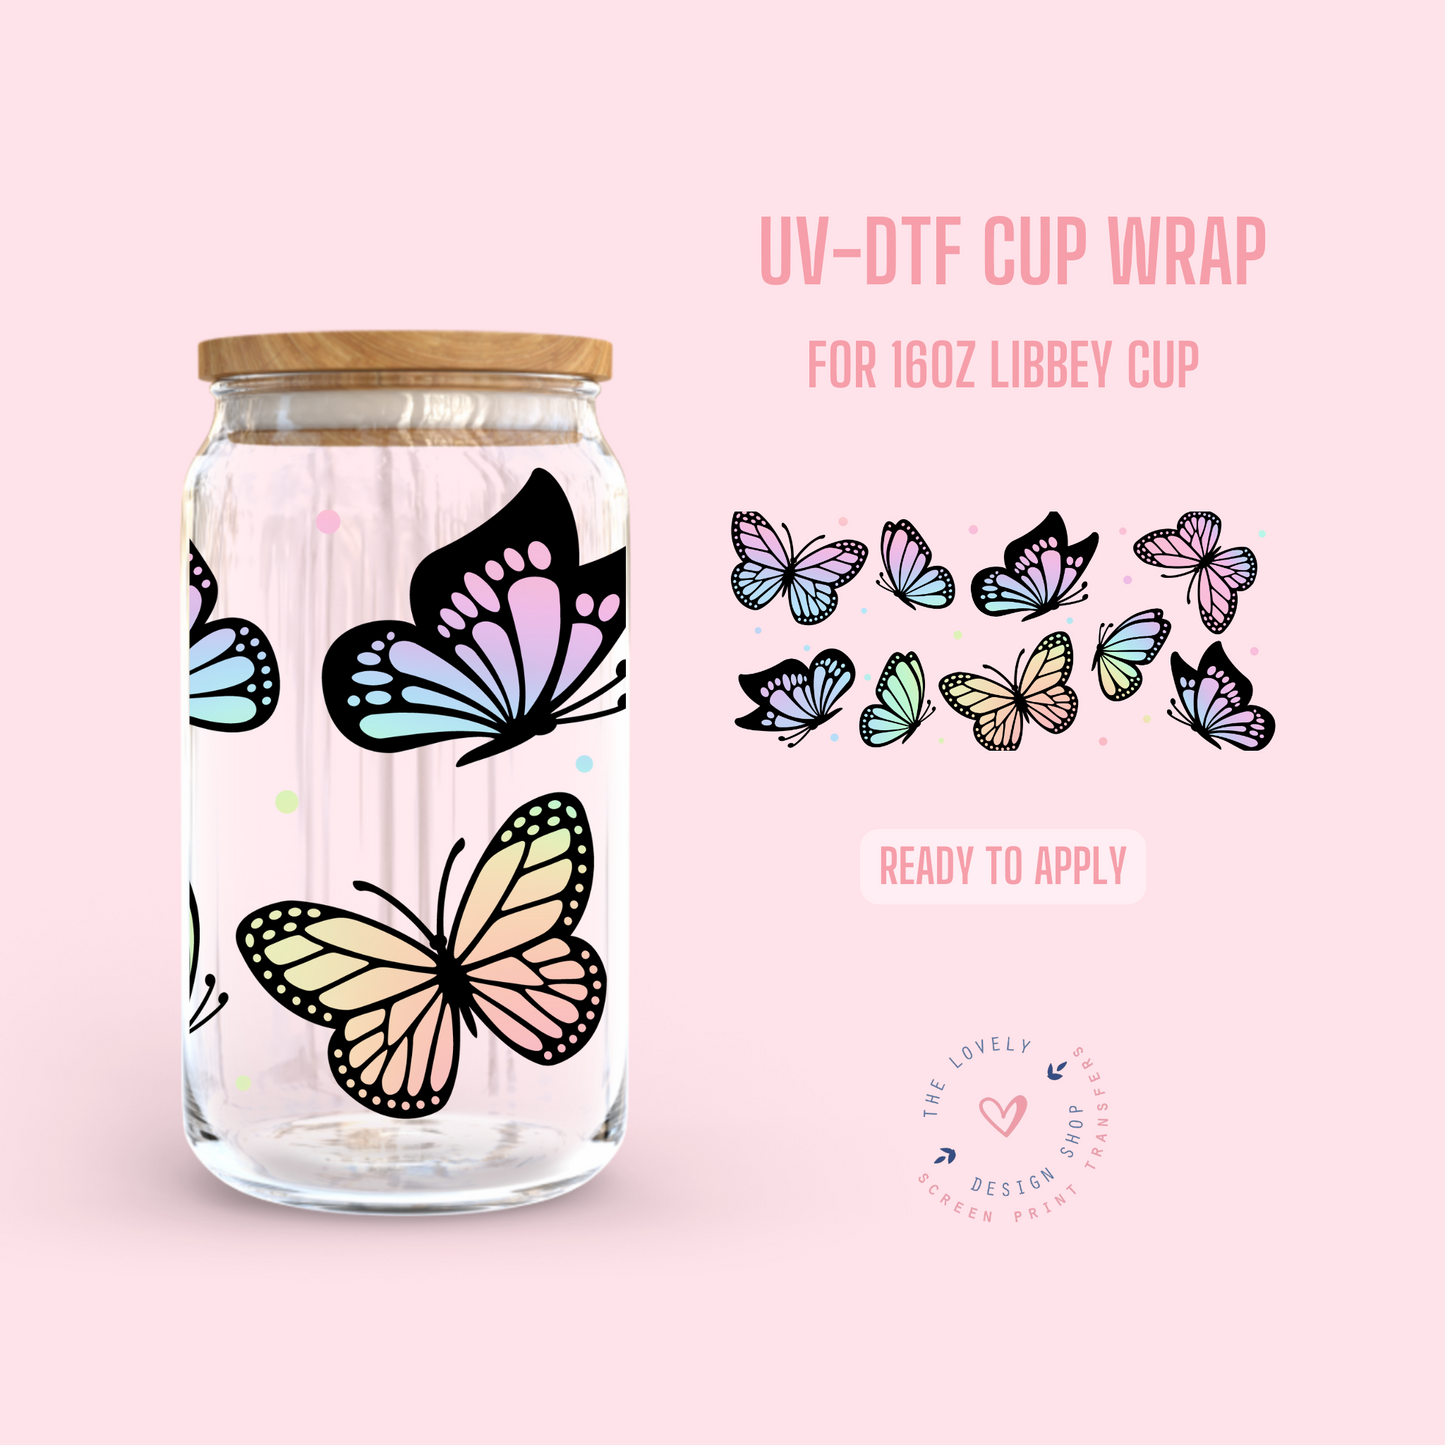 Iridescent Butterflies - UV DTF 16 oz Libbey Cup Wrap (Ready to Ship)